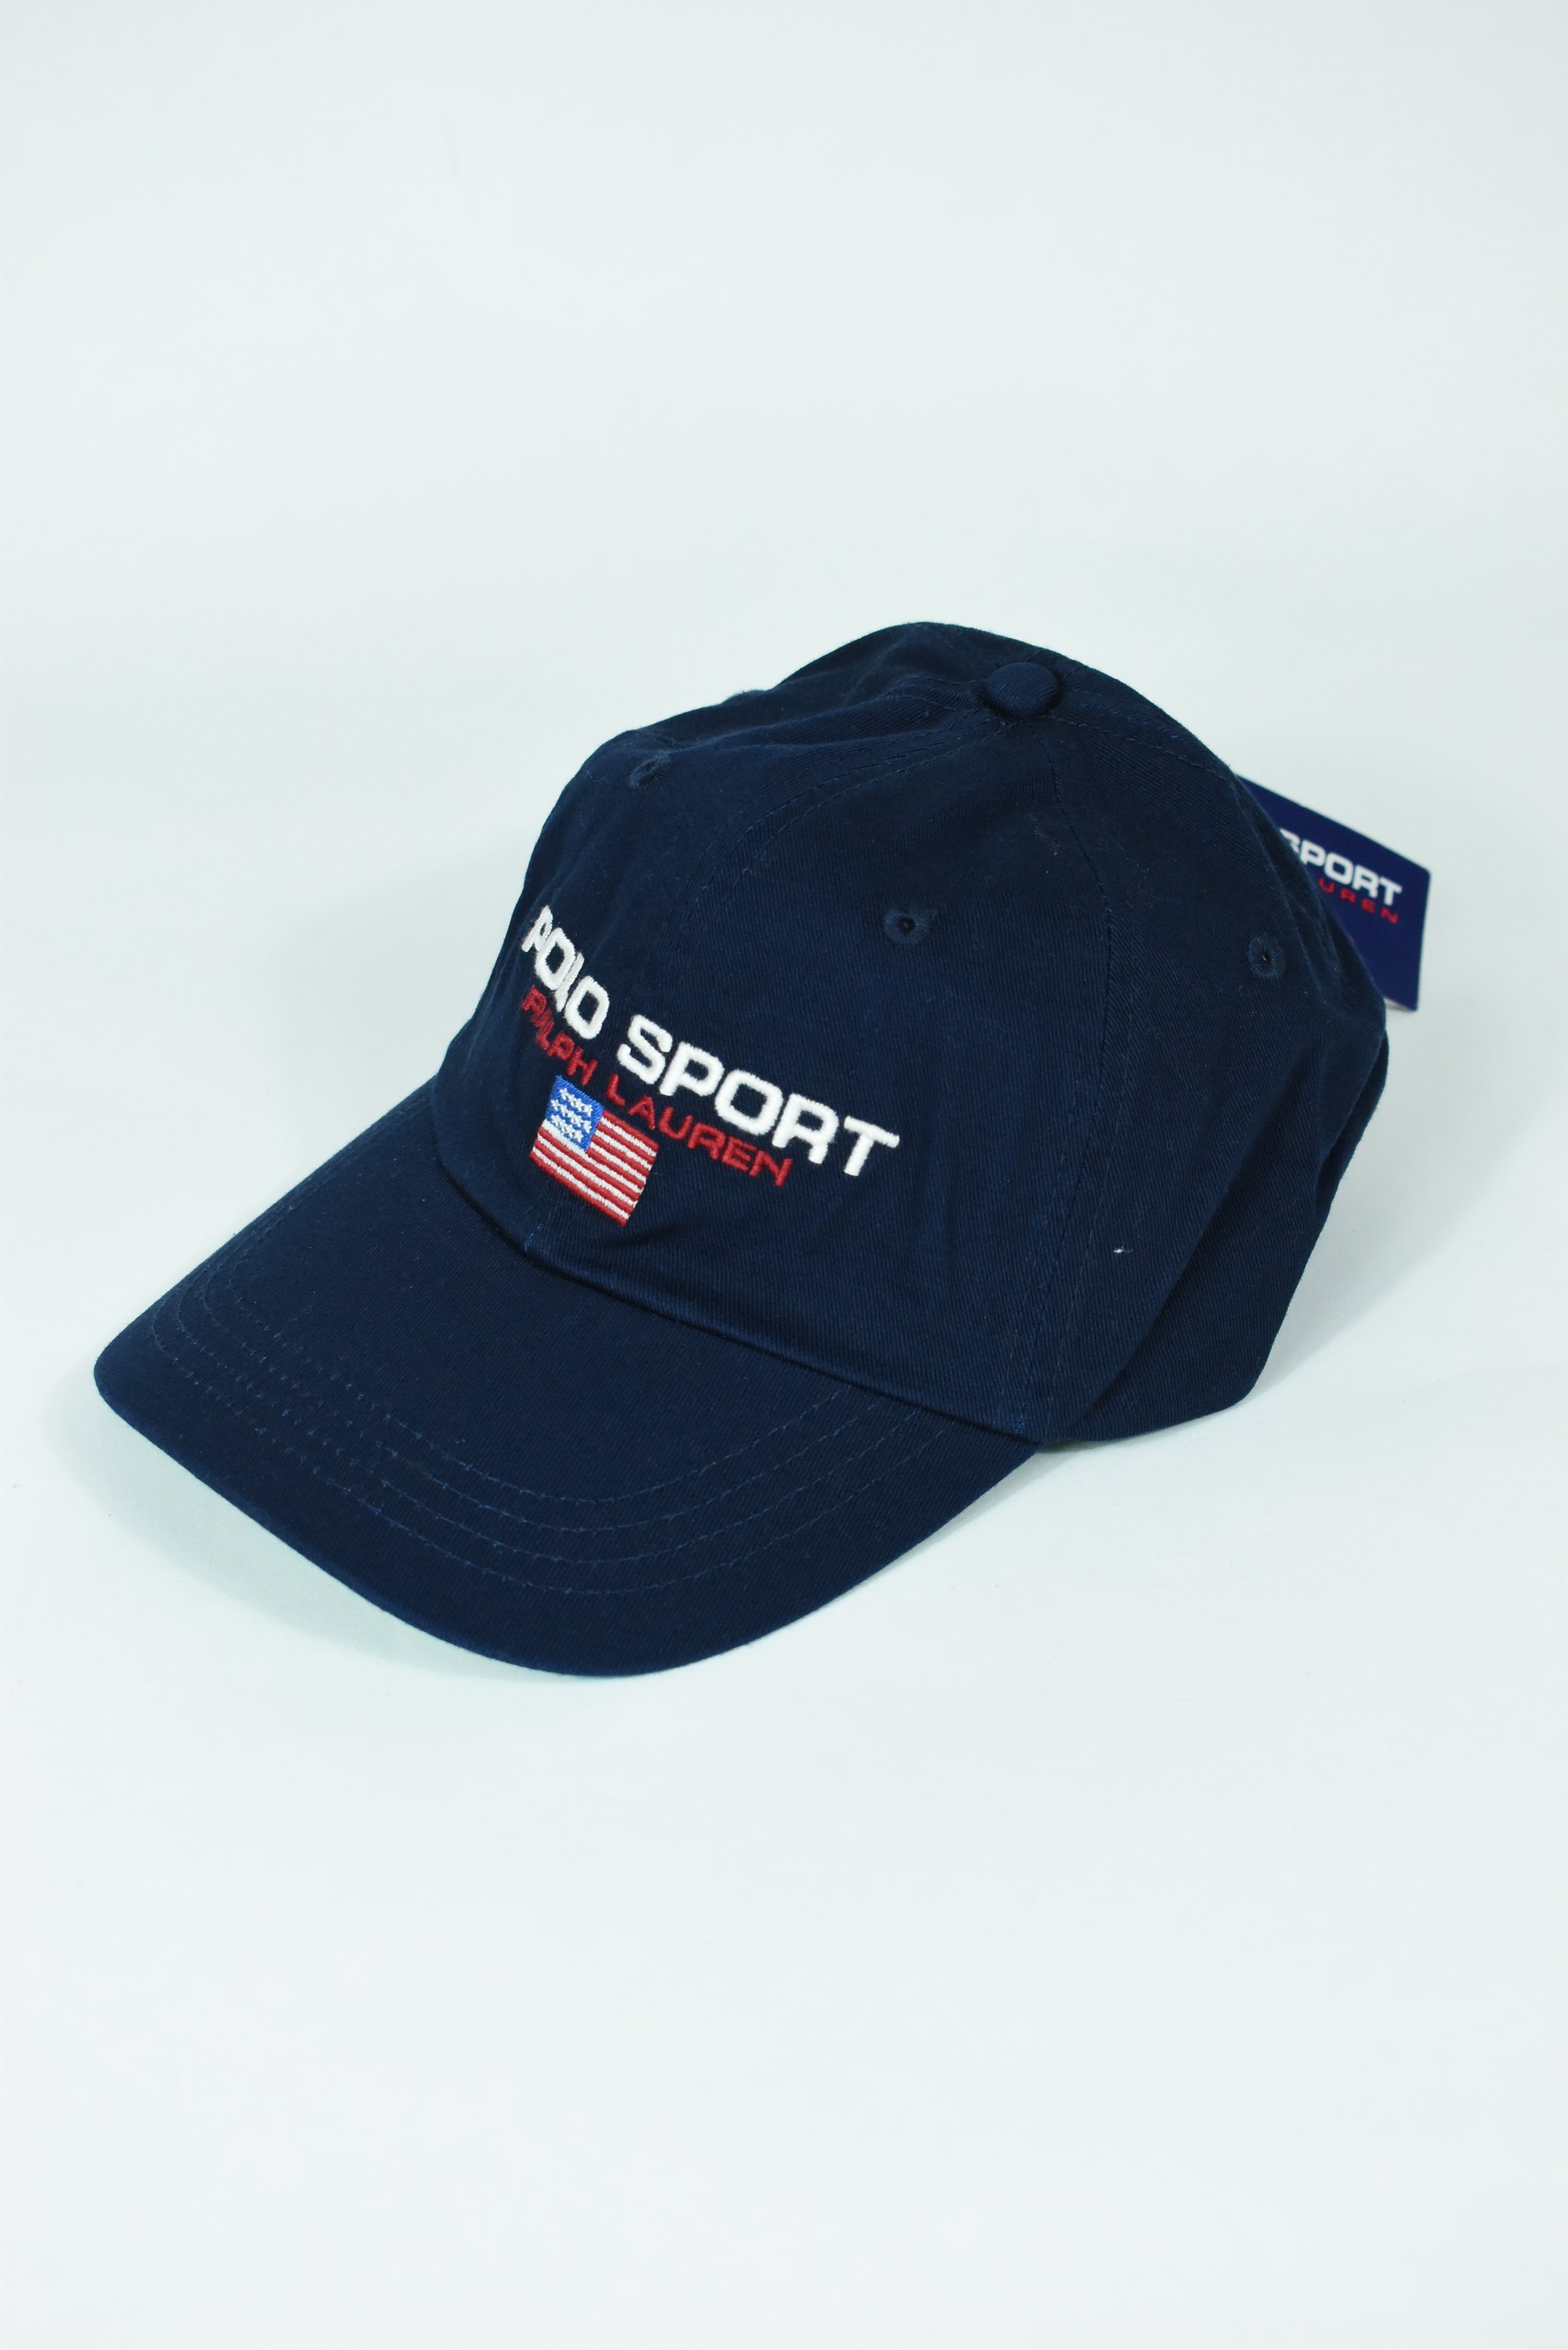 New Navy RL Polo Sport Embroidery Cap